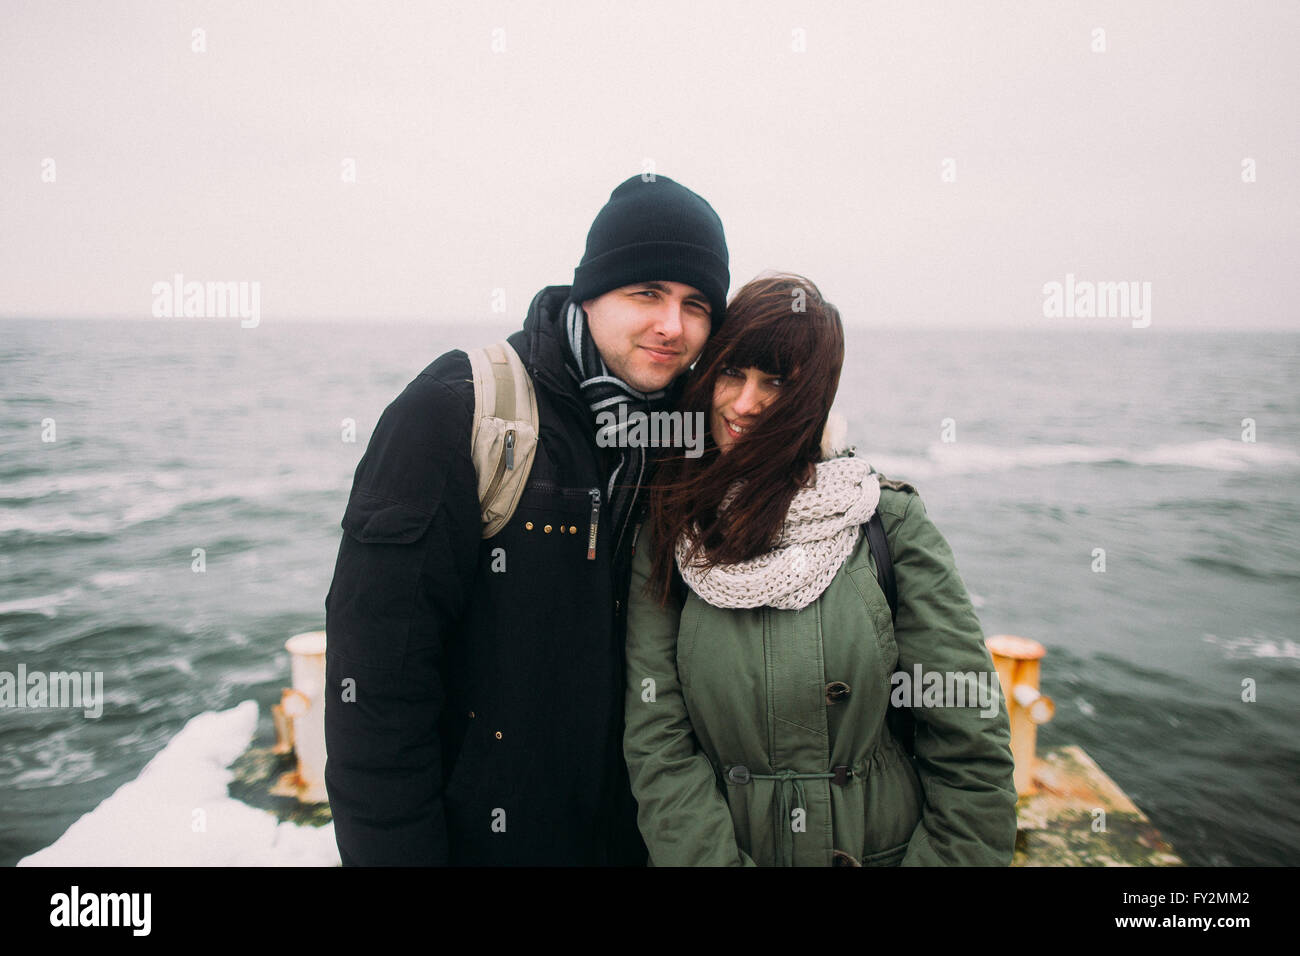 Portrait of urban fashion stylish couple posing and holding hands on the old pier in winter vacation. Travel together concept. Sea background Stock Photo